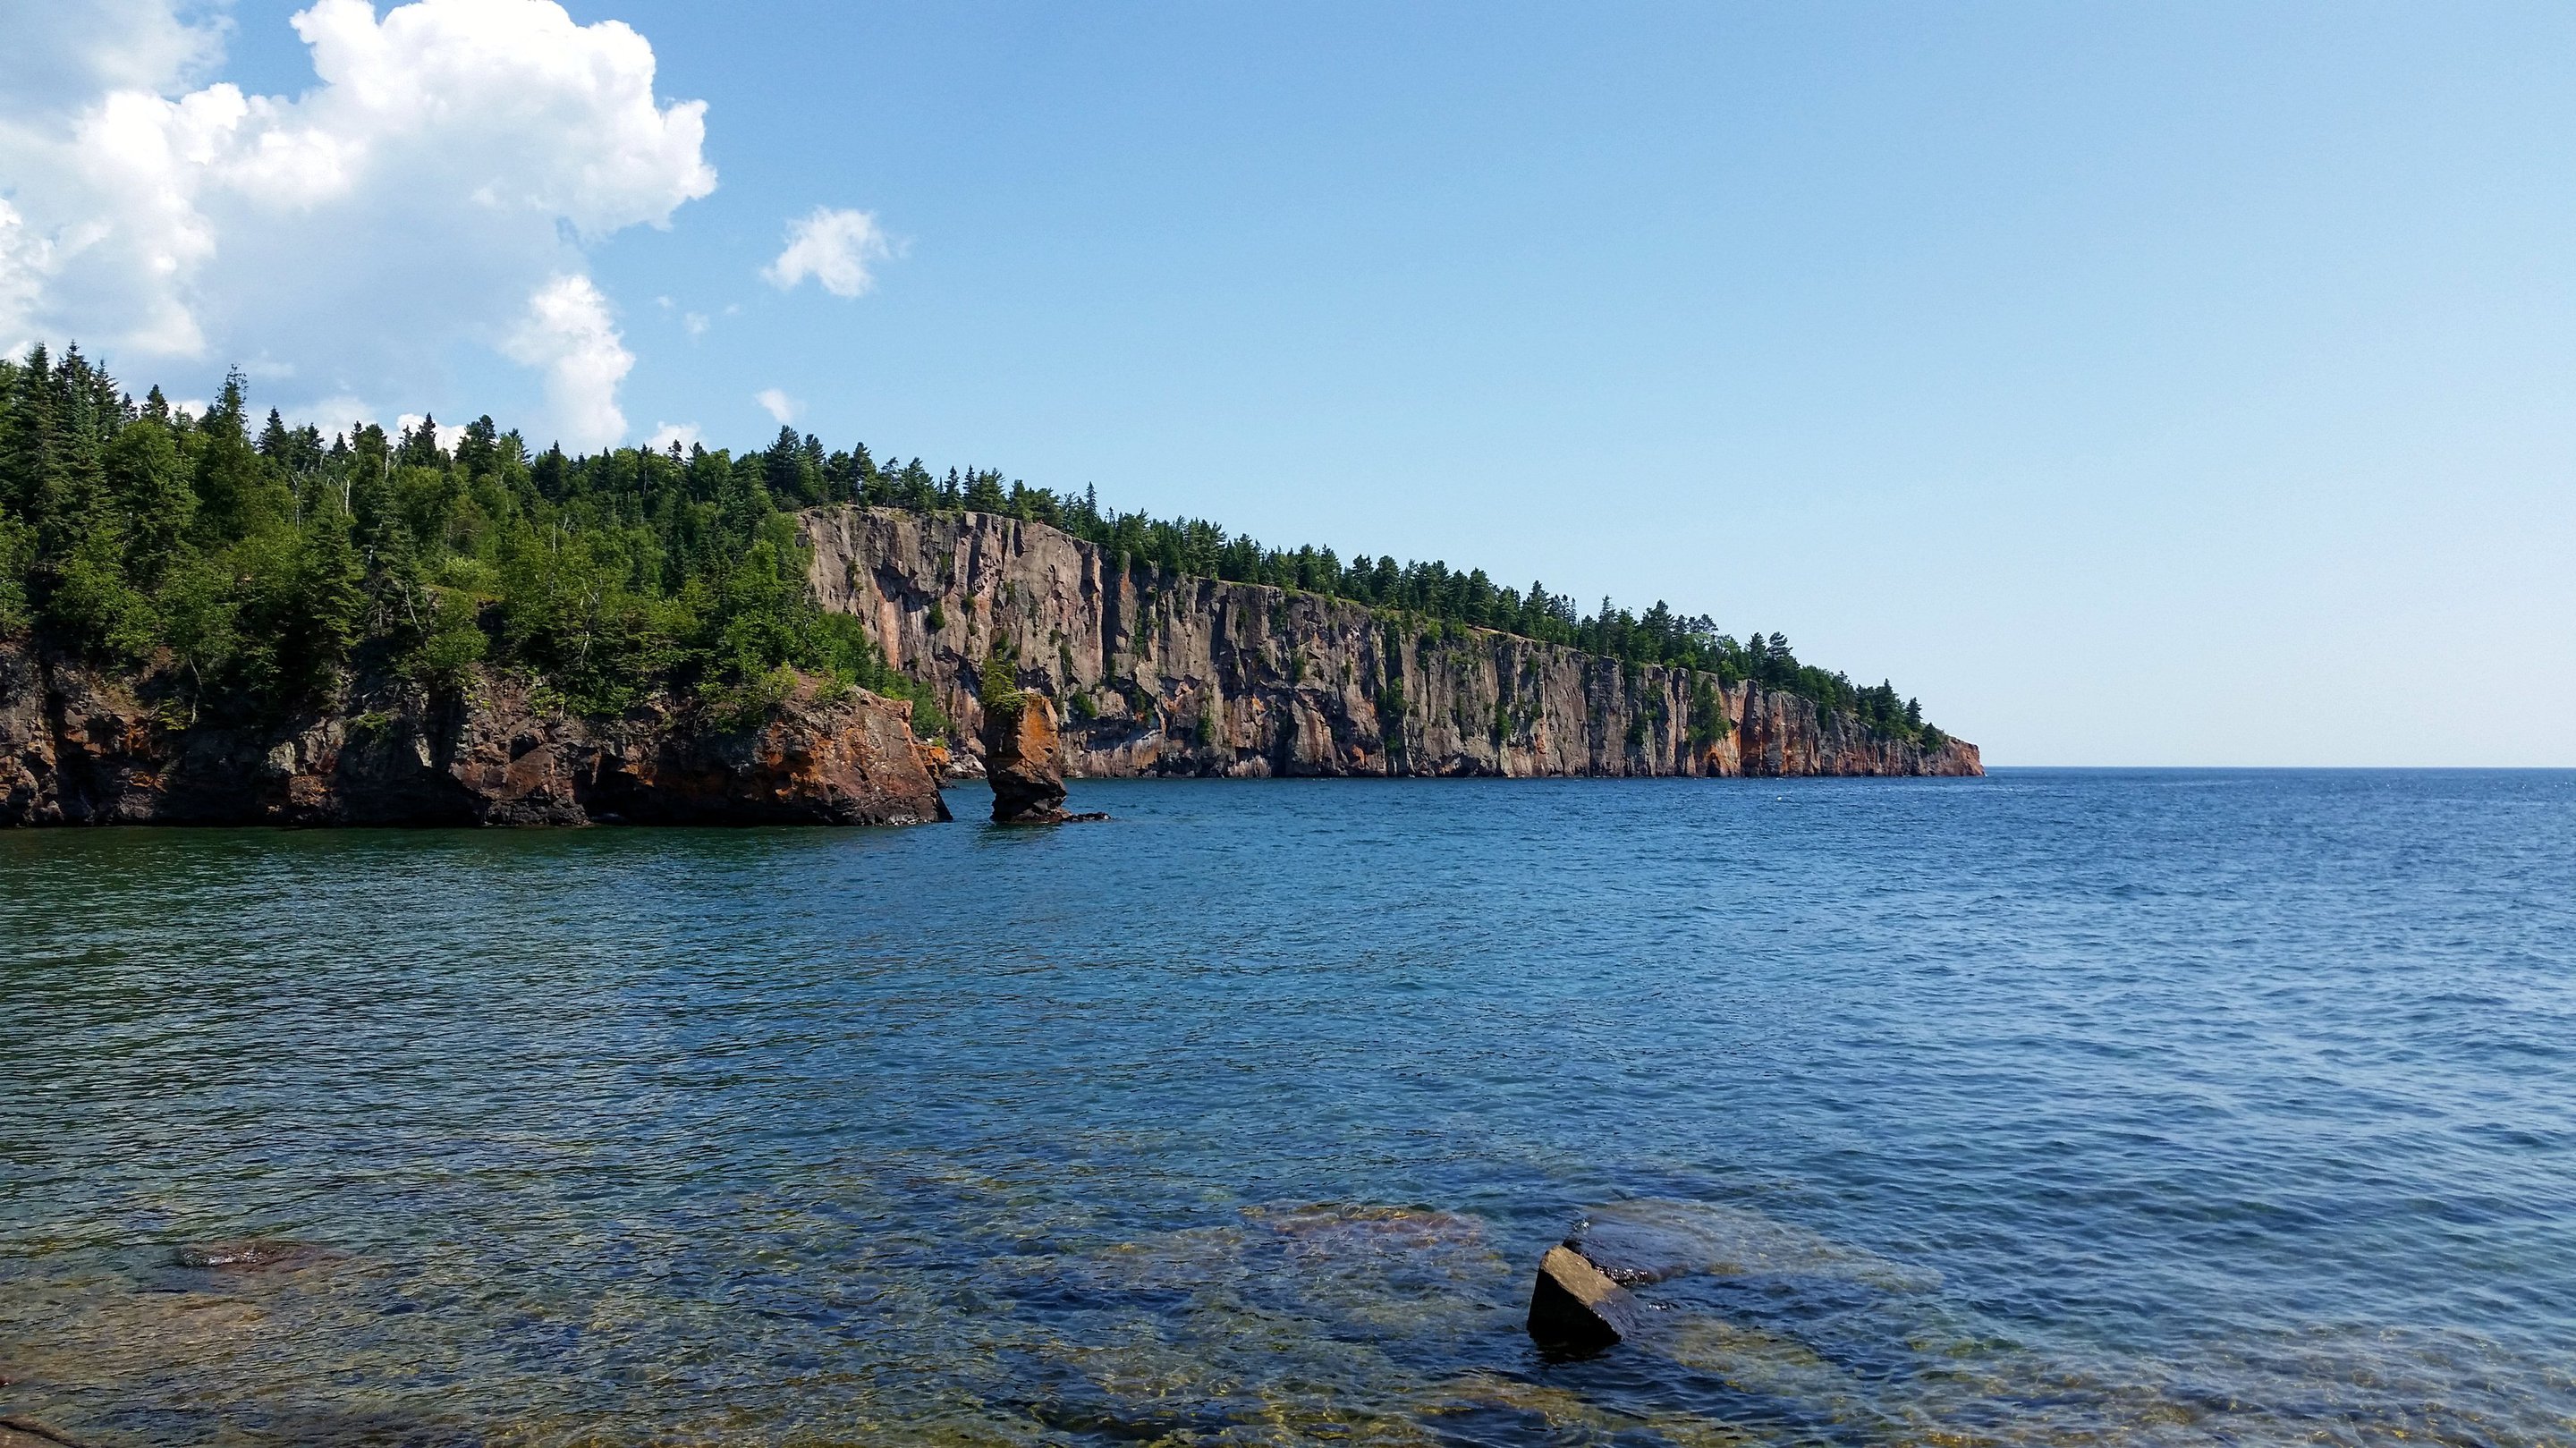 Tettegouche State Park,MN photographed by Corrinne Gilbertson